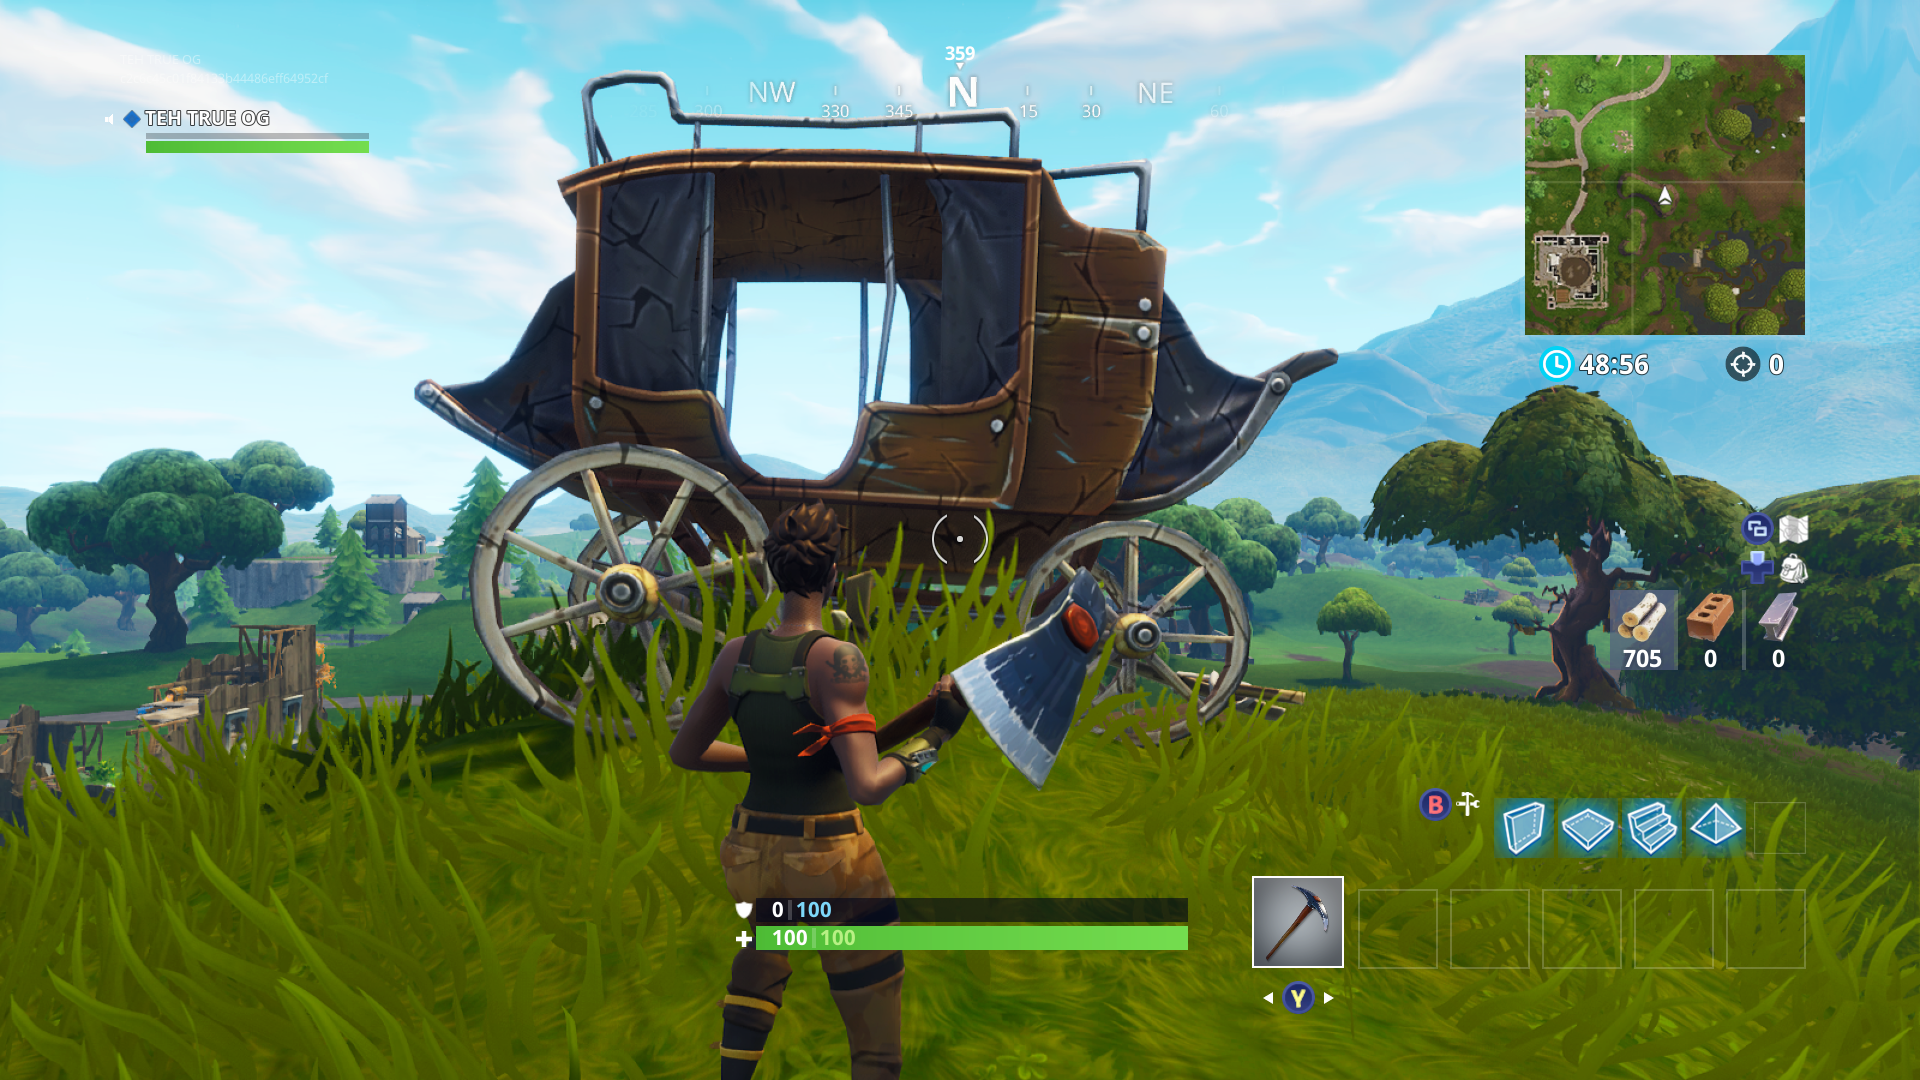 Fortnite Portal Arrives With A Stagecoach Here S How To Find It - fortnite portal arrives with a stagecoach here s how to find it